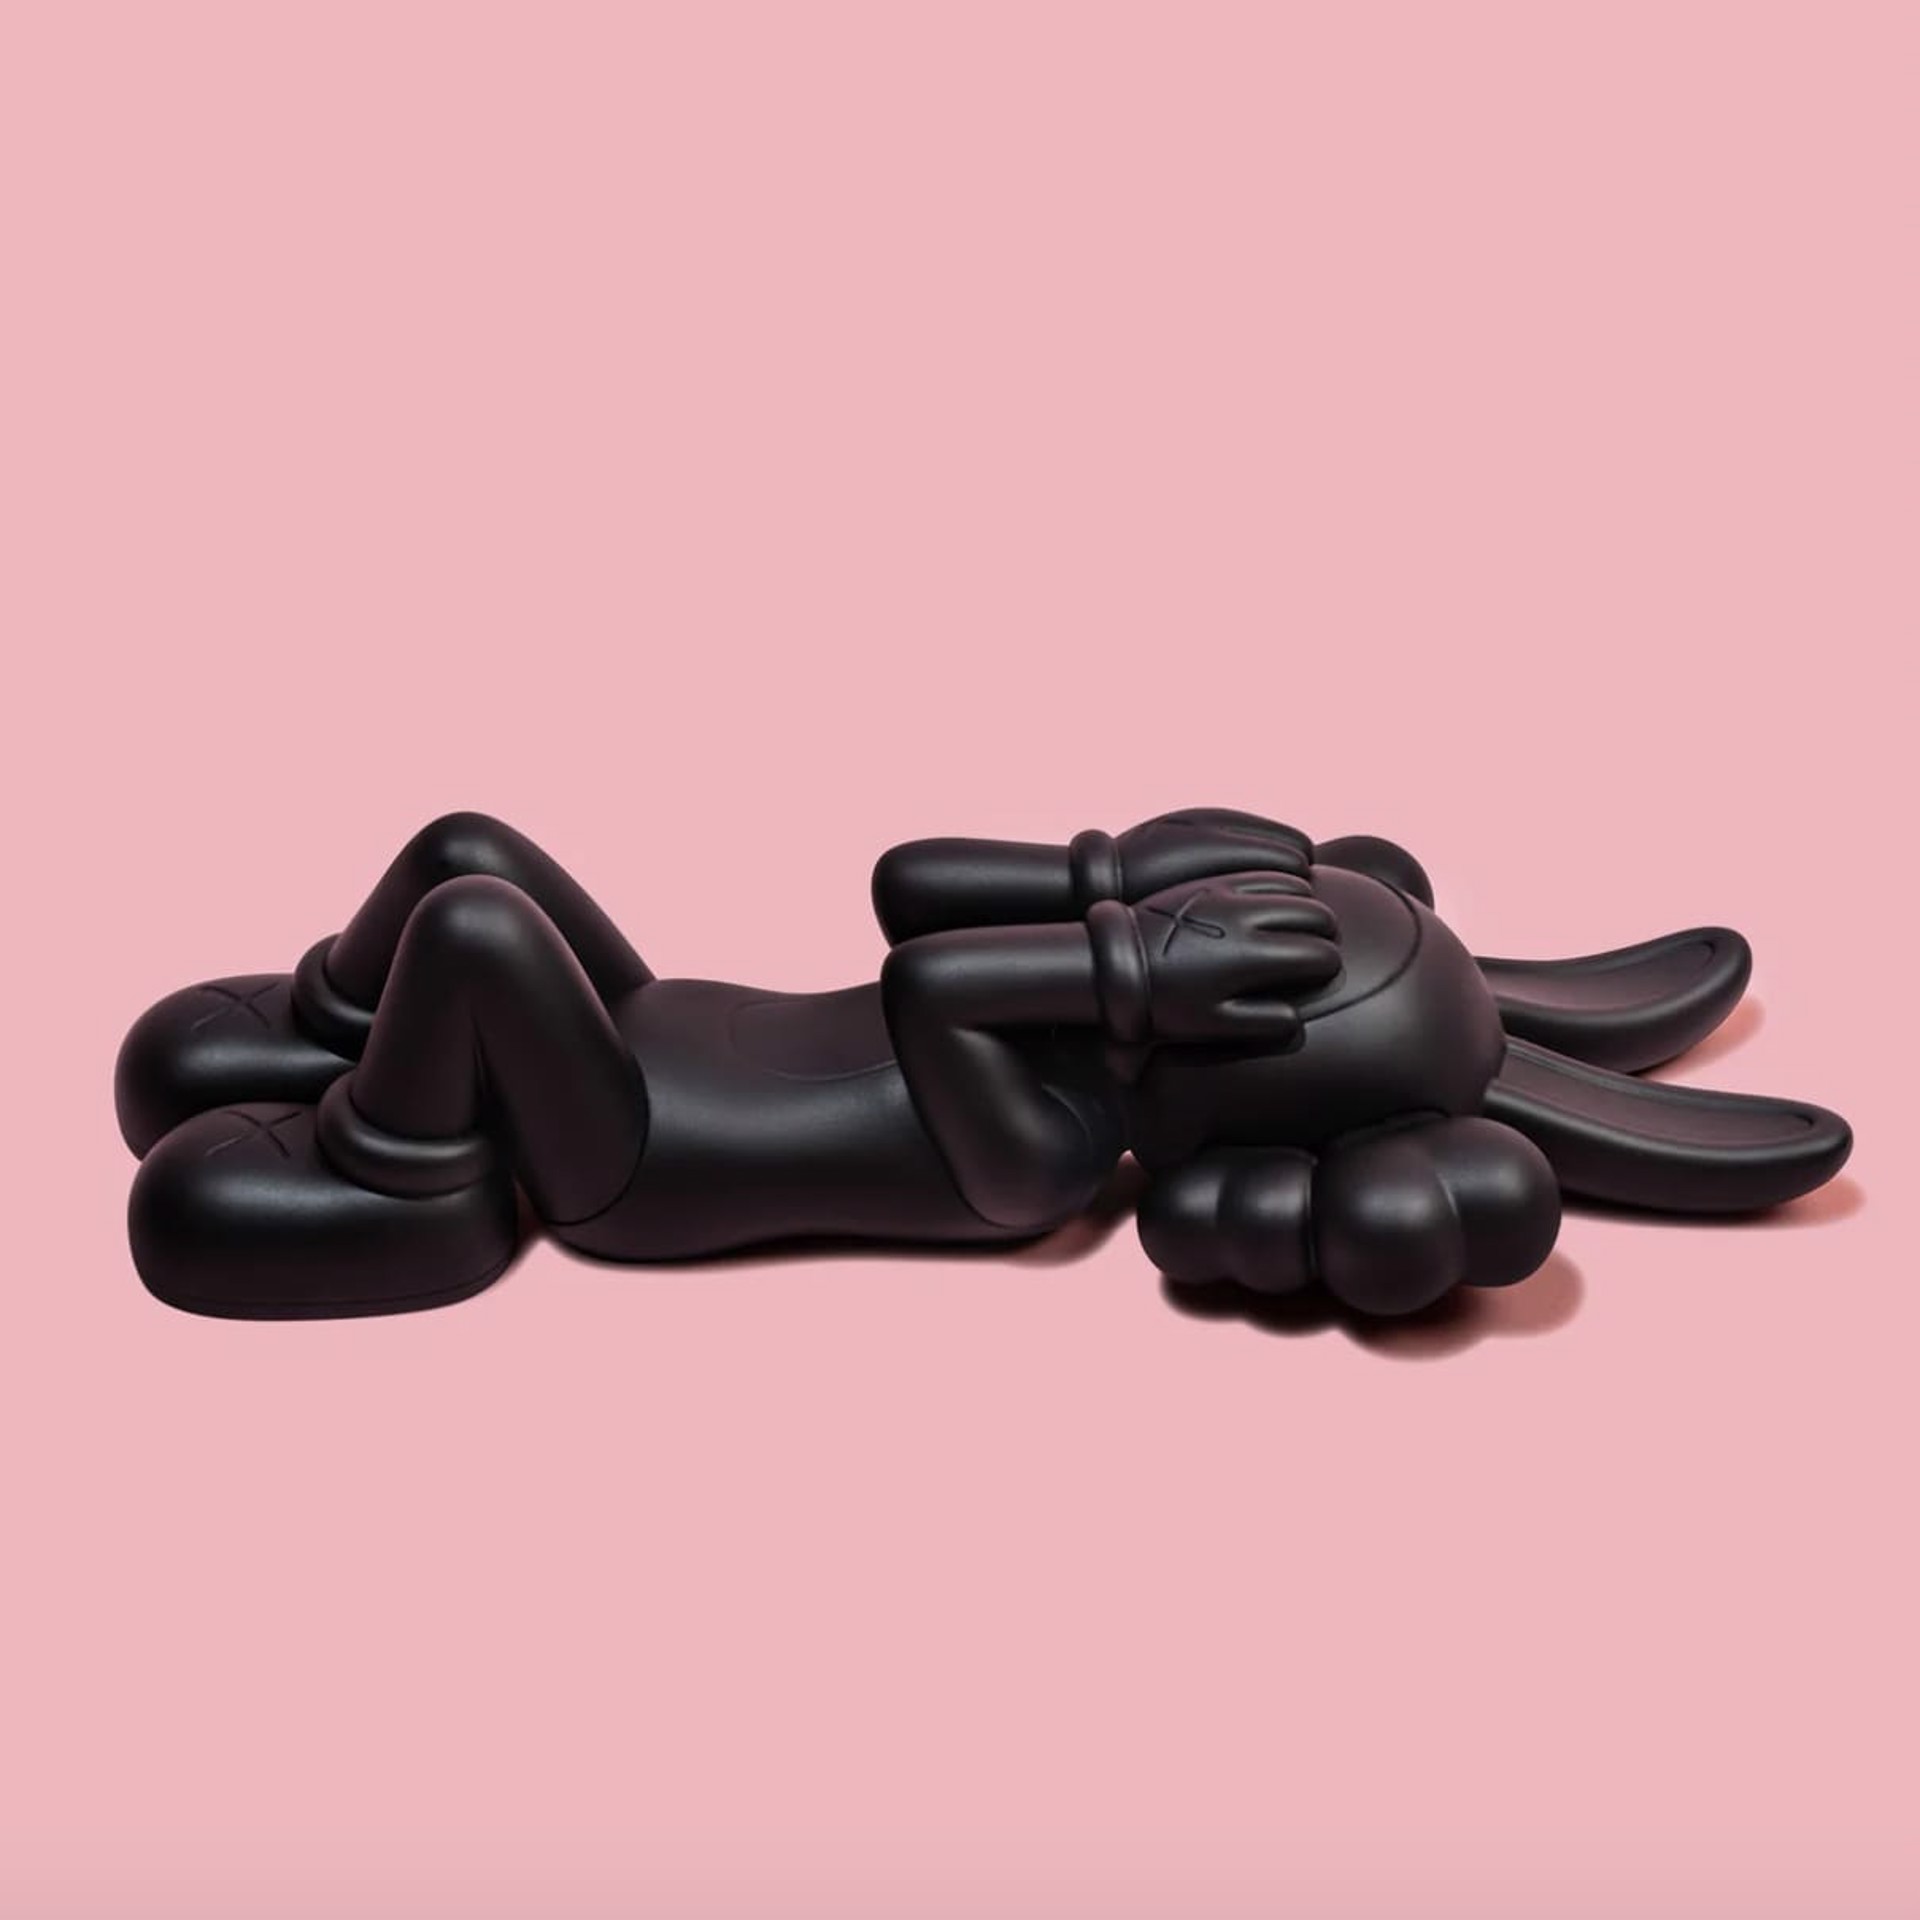 HOLIDAY INDONESIA - ACCOMPLICE Figure (Black) by Kaws